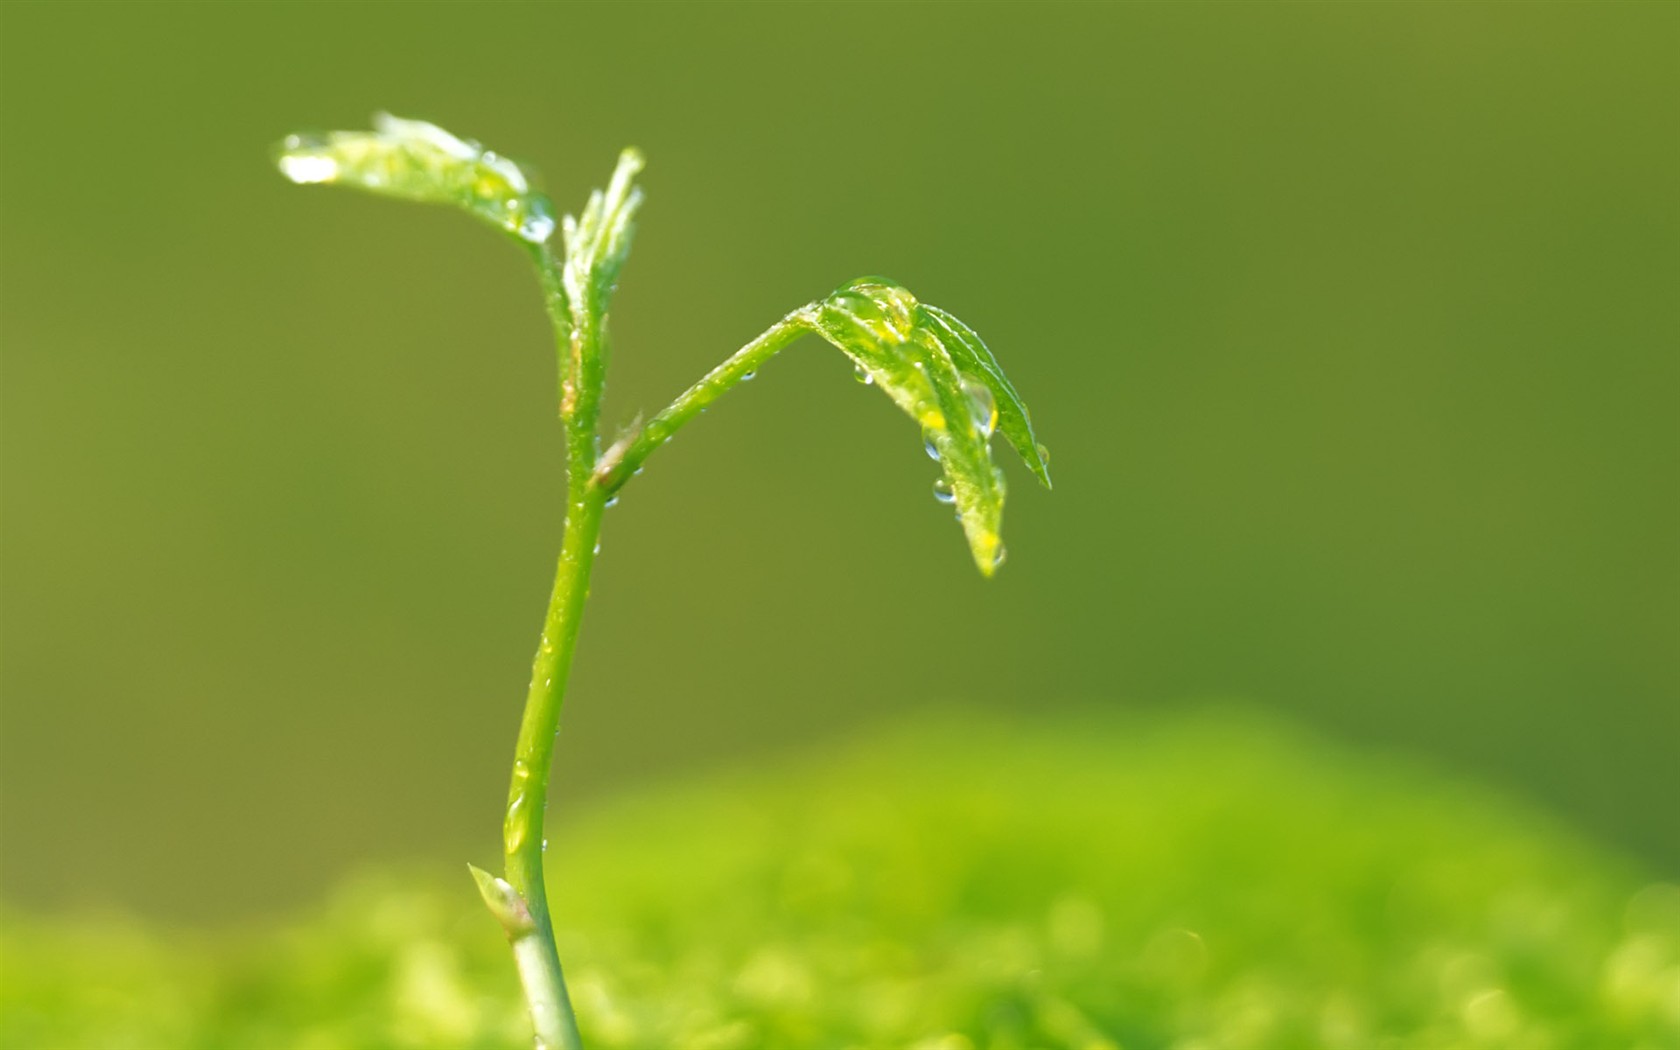 Sprout leaves HD Wallpaper (2) #38 - 1680x1050